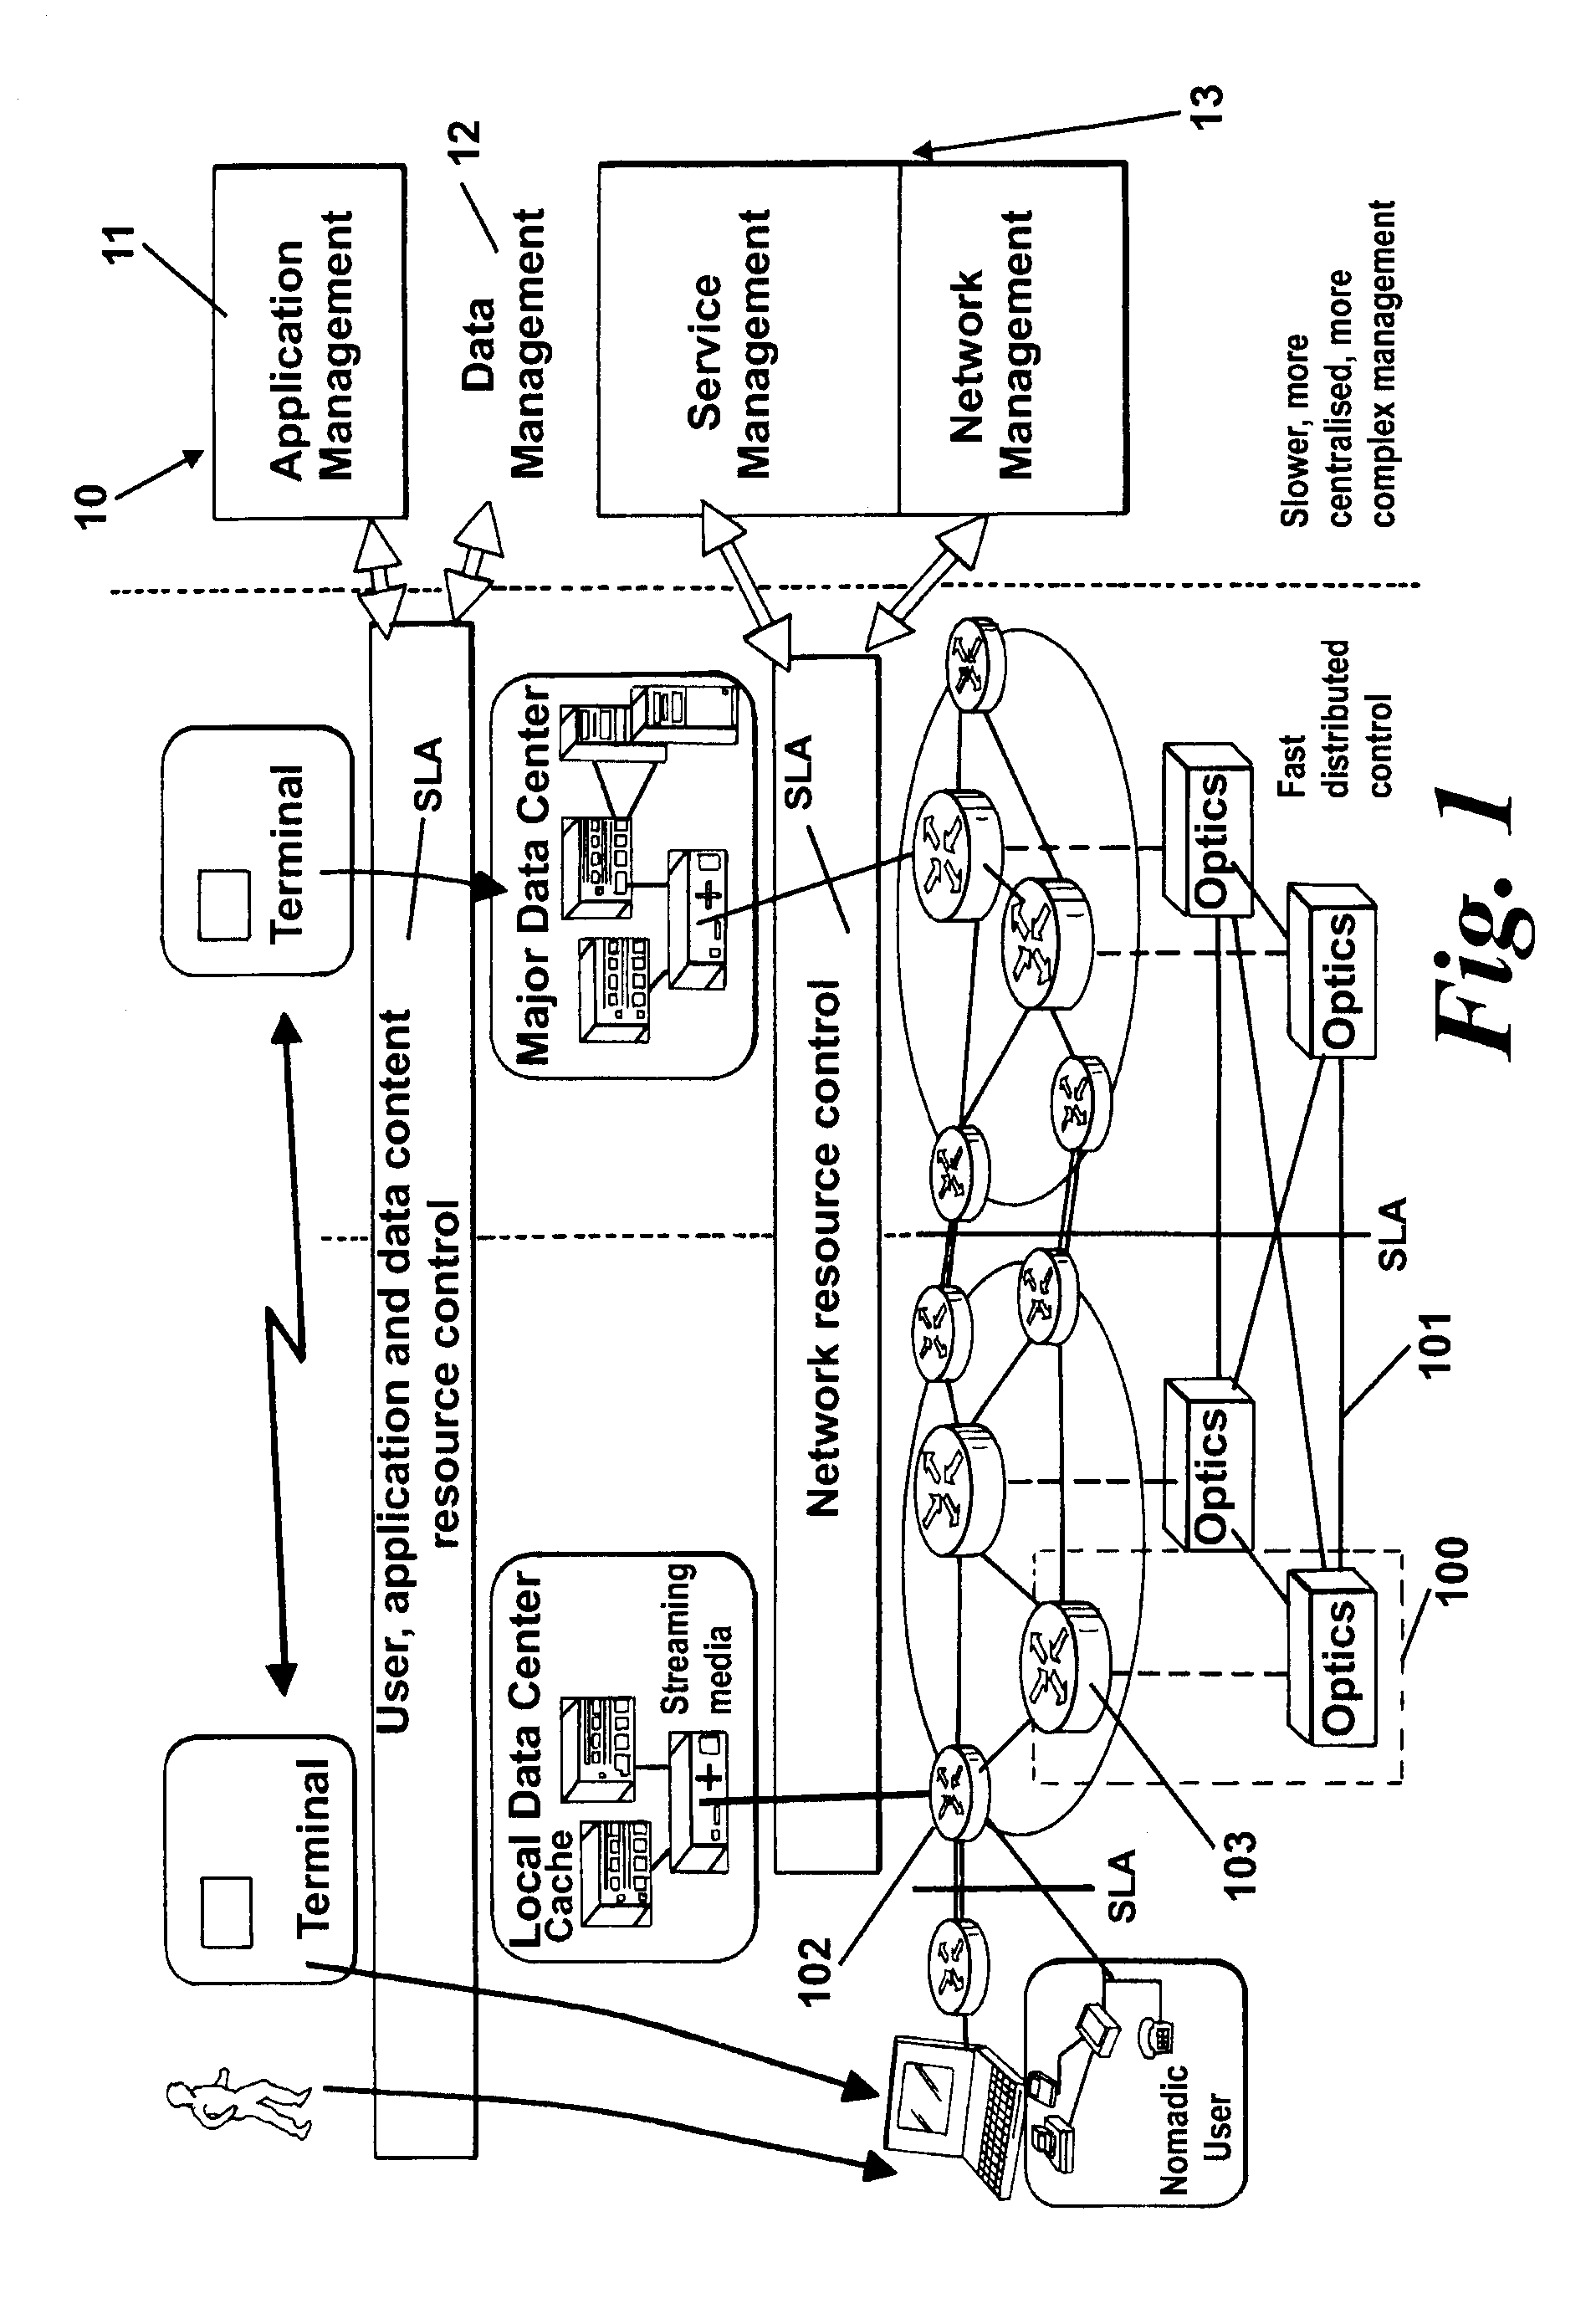 Management and control of multi-layer networks